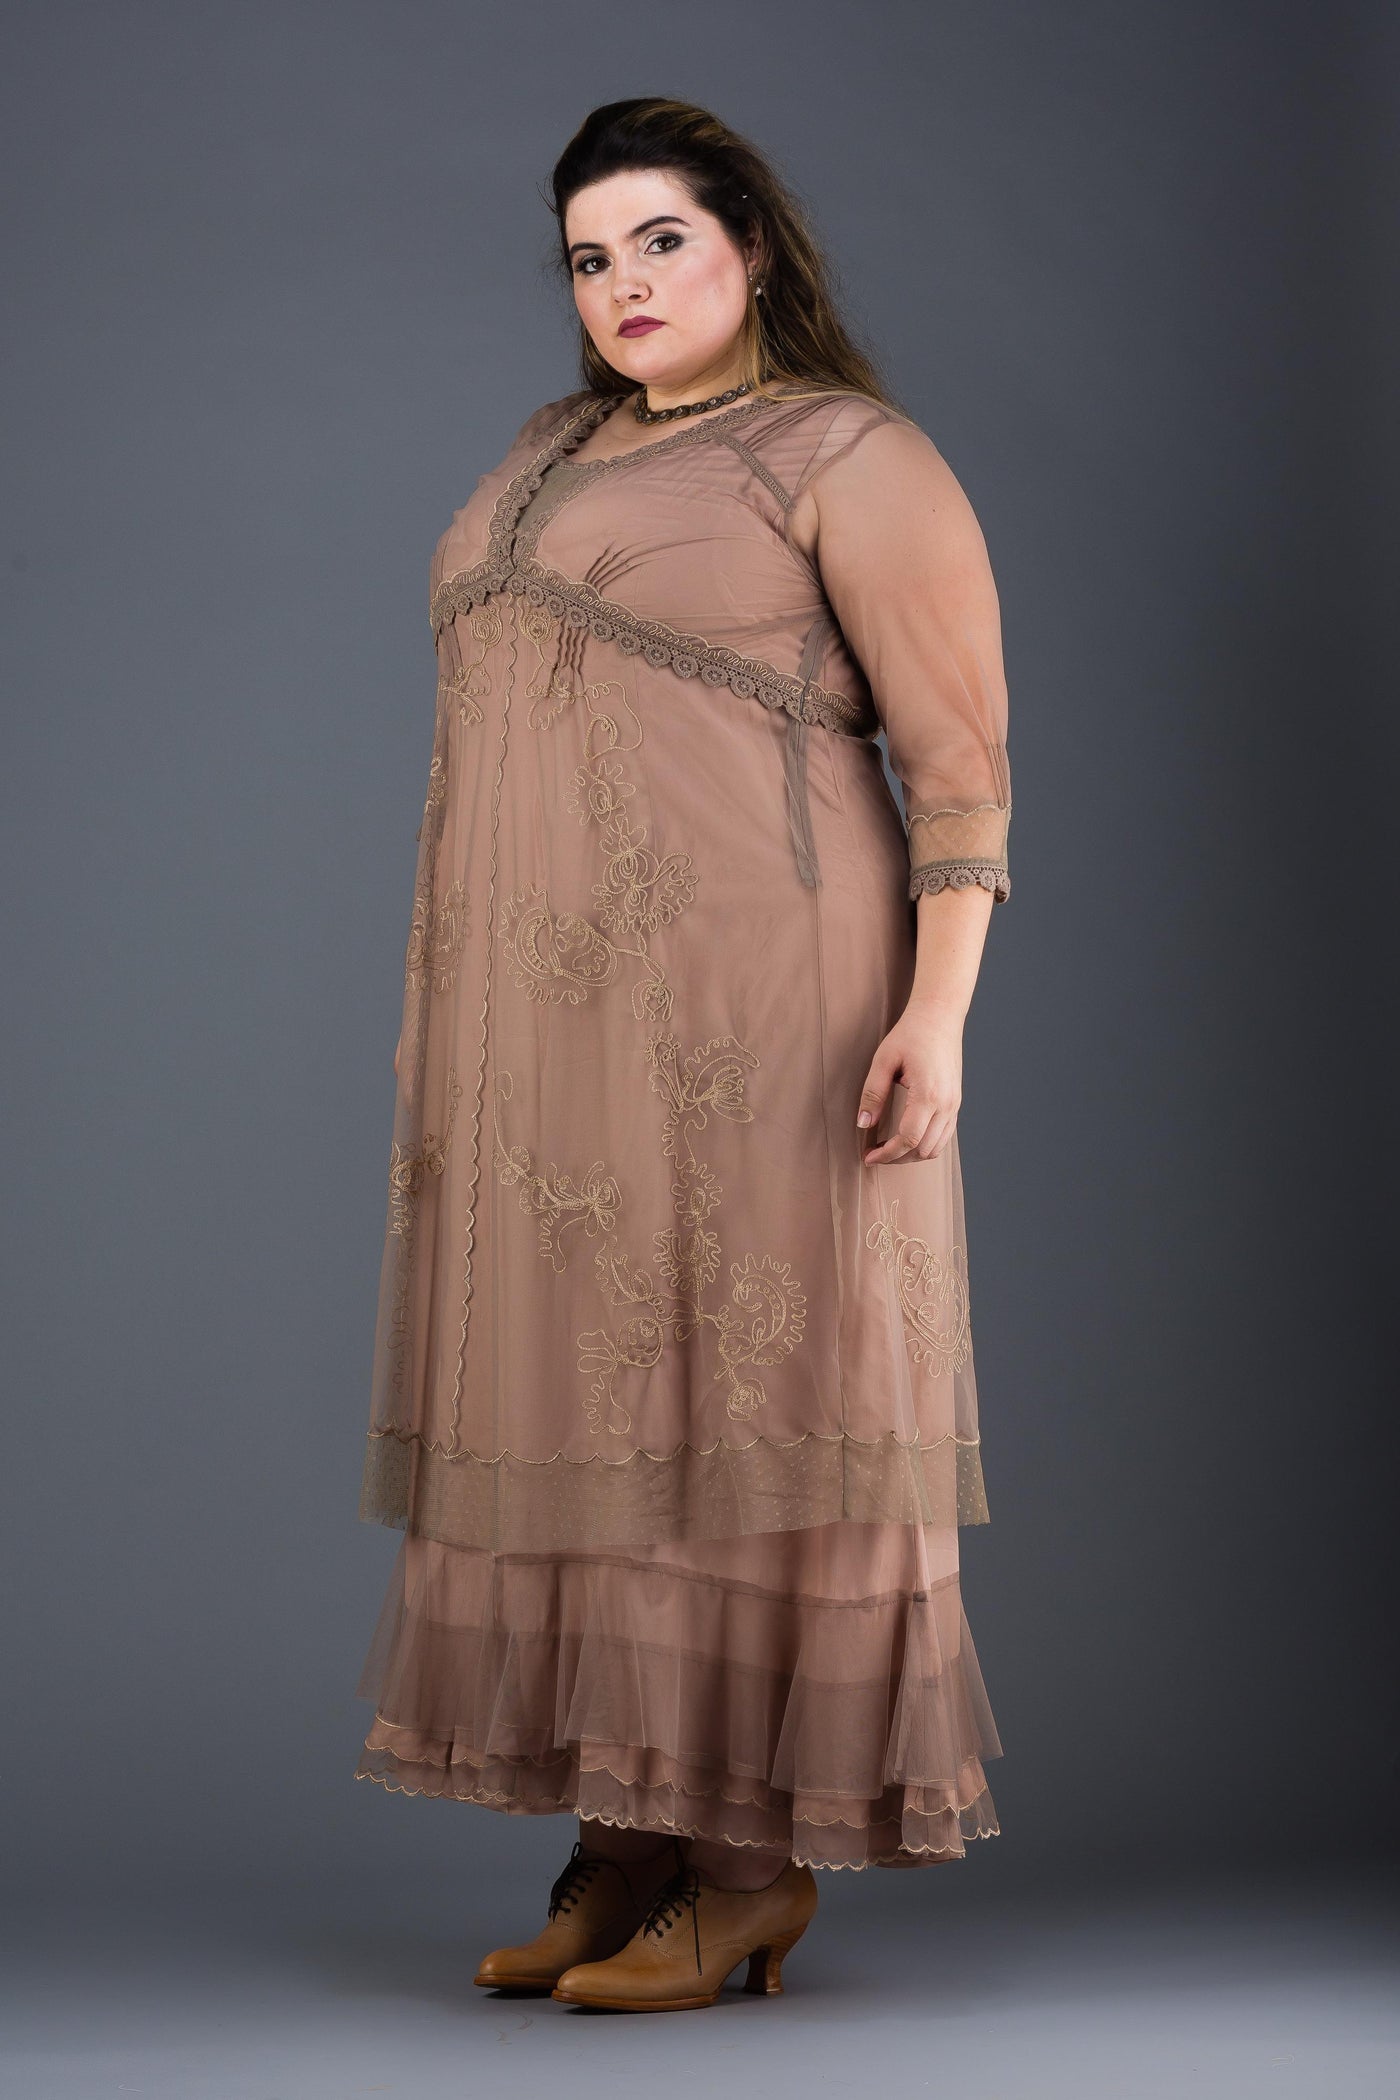 Plus SIze Vintage Style Party Gown in Sand by Nataya